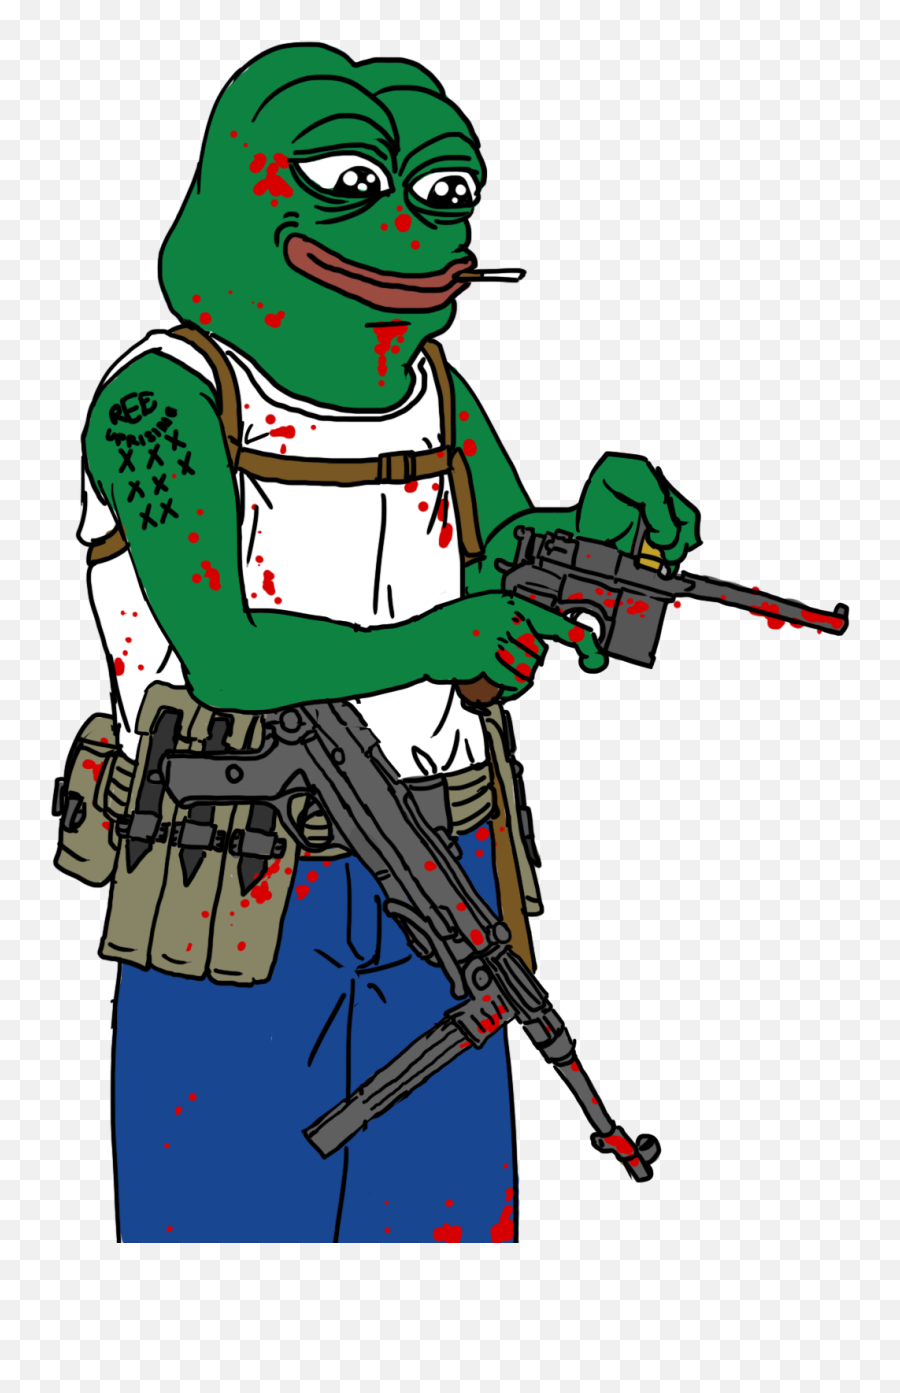 What The Did You Just Say You Little Bitch - White Pepe The Frog Gun Emoji,Pepe The Frog Emoji